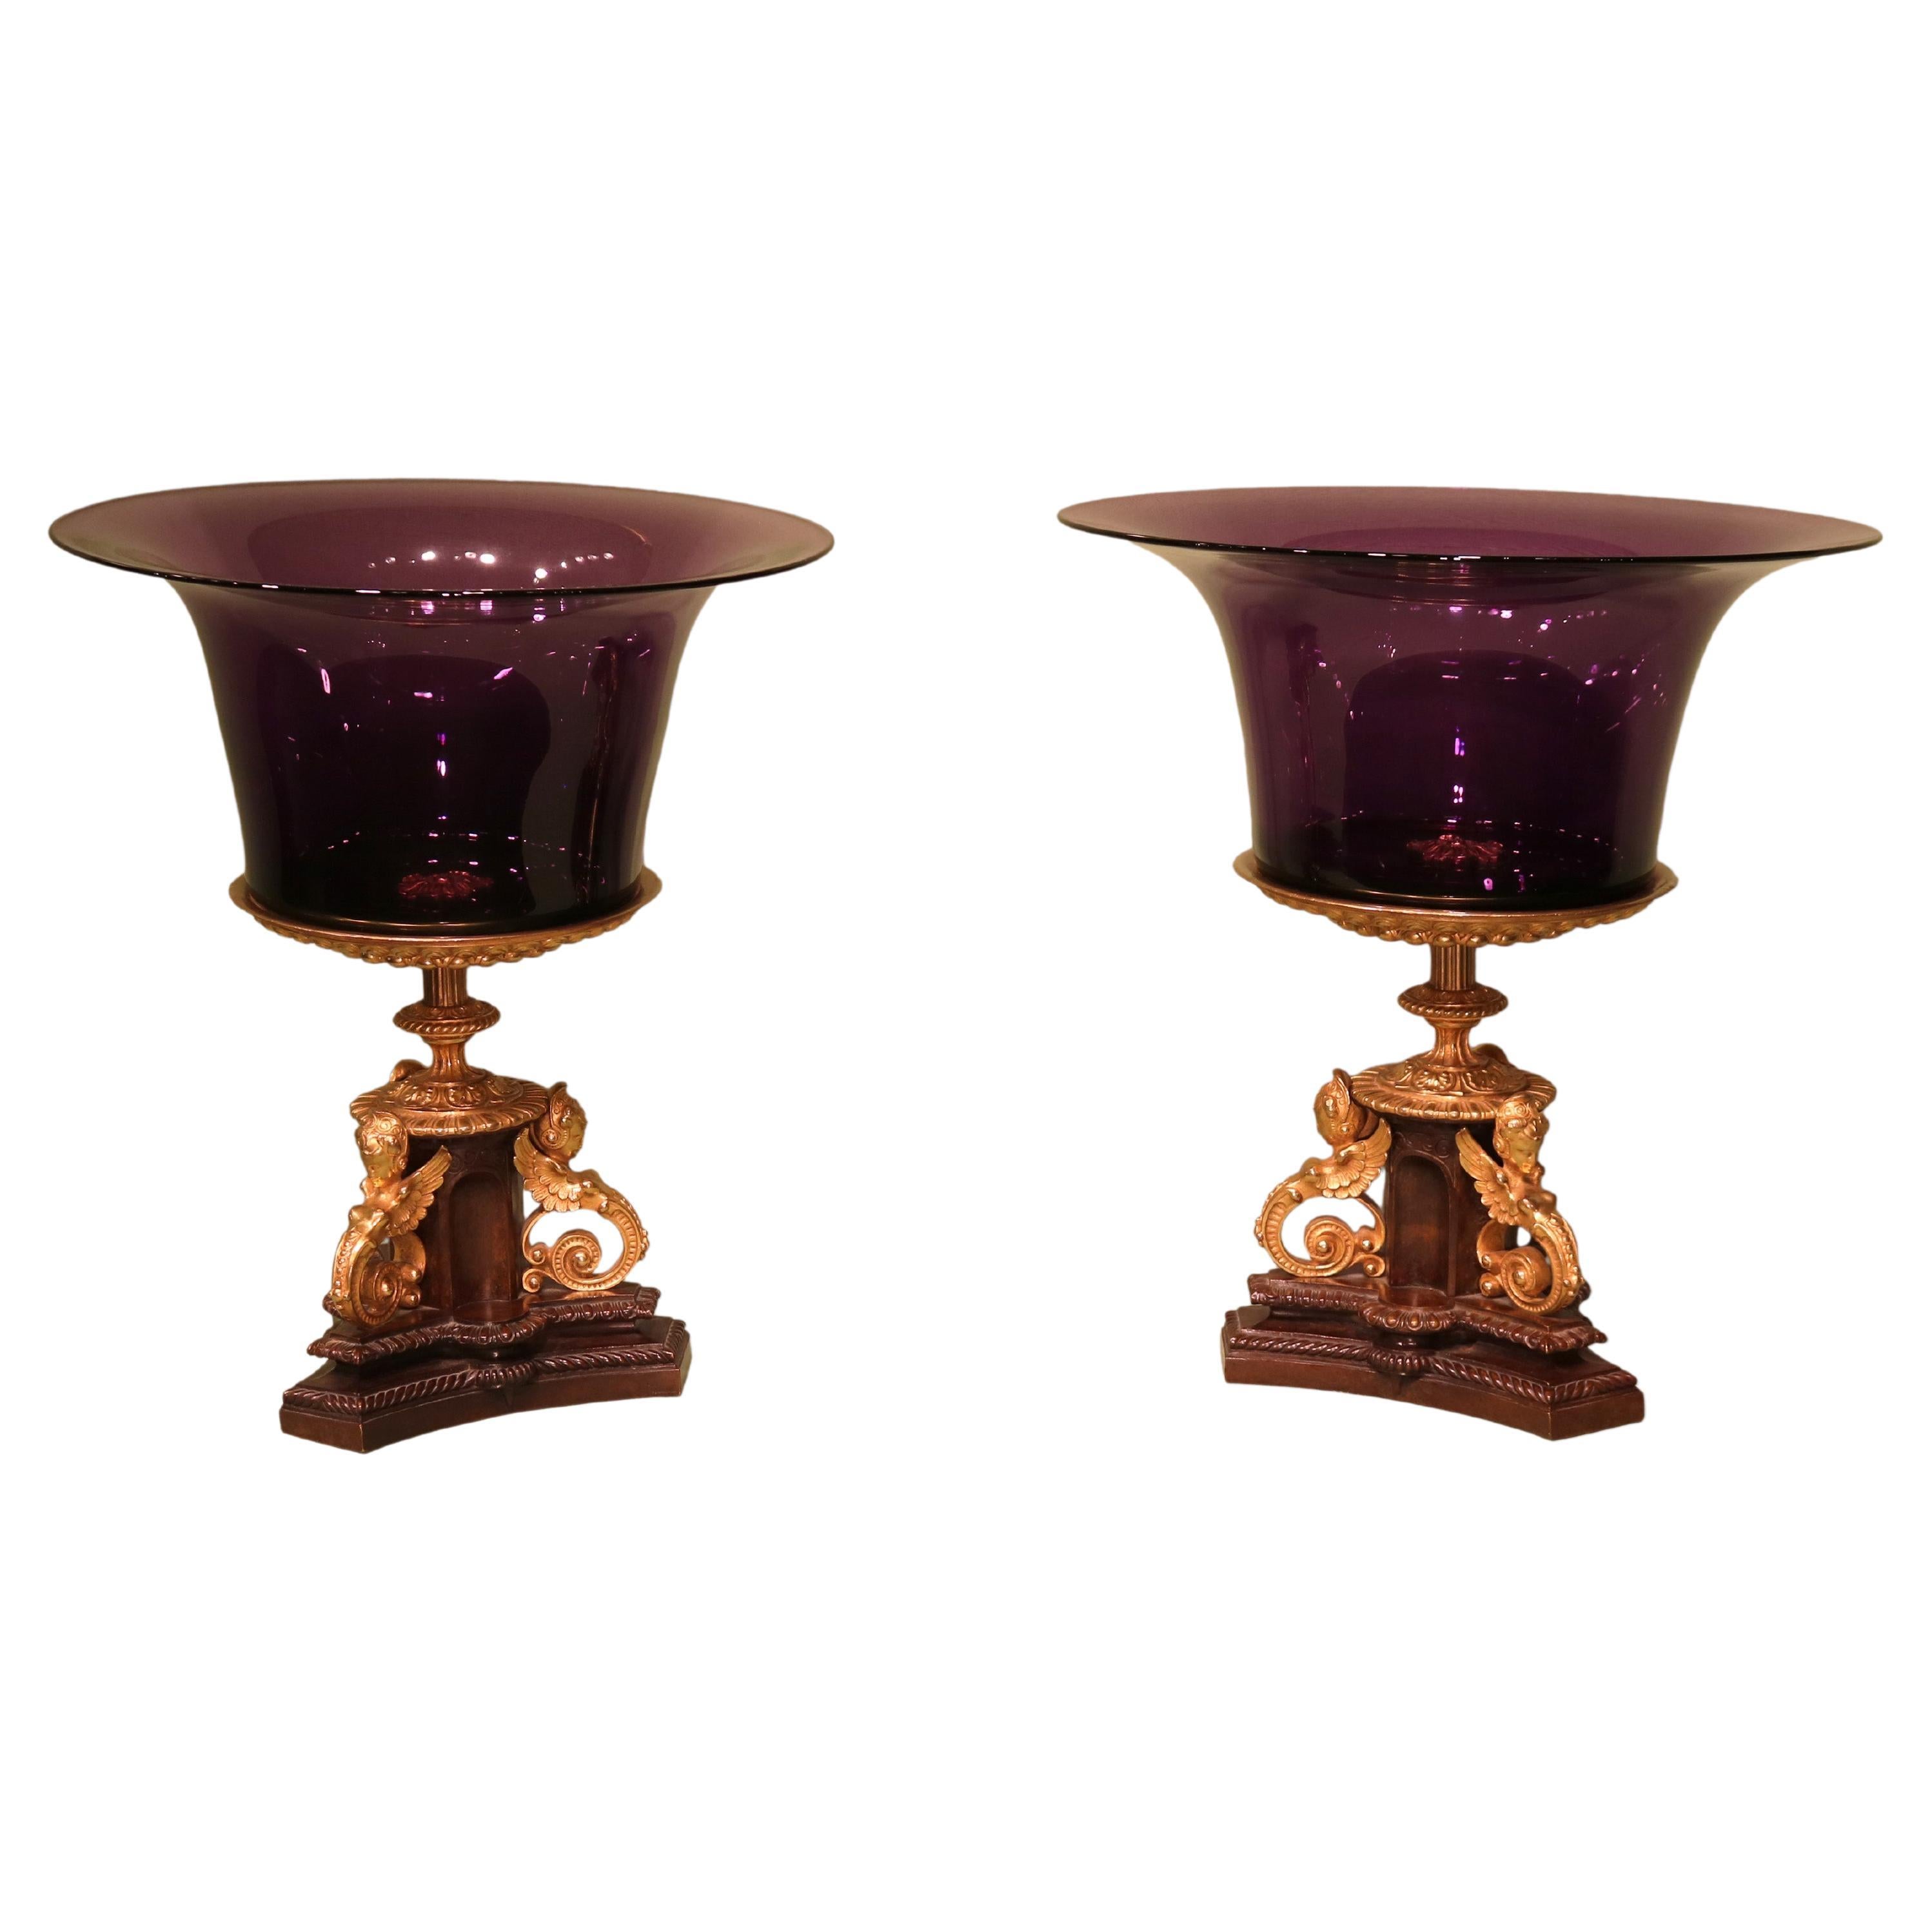 Antique Pair of Bronze and Ormolu Tazzas with Amethyst Glass Bowls